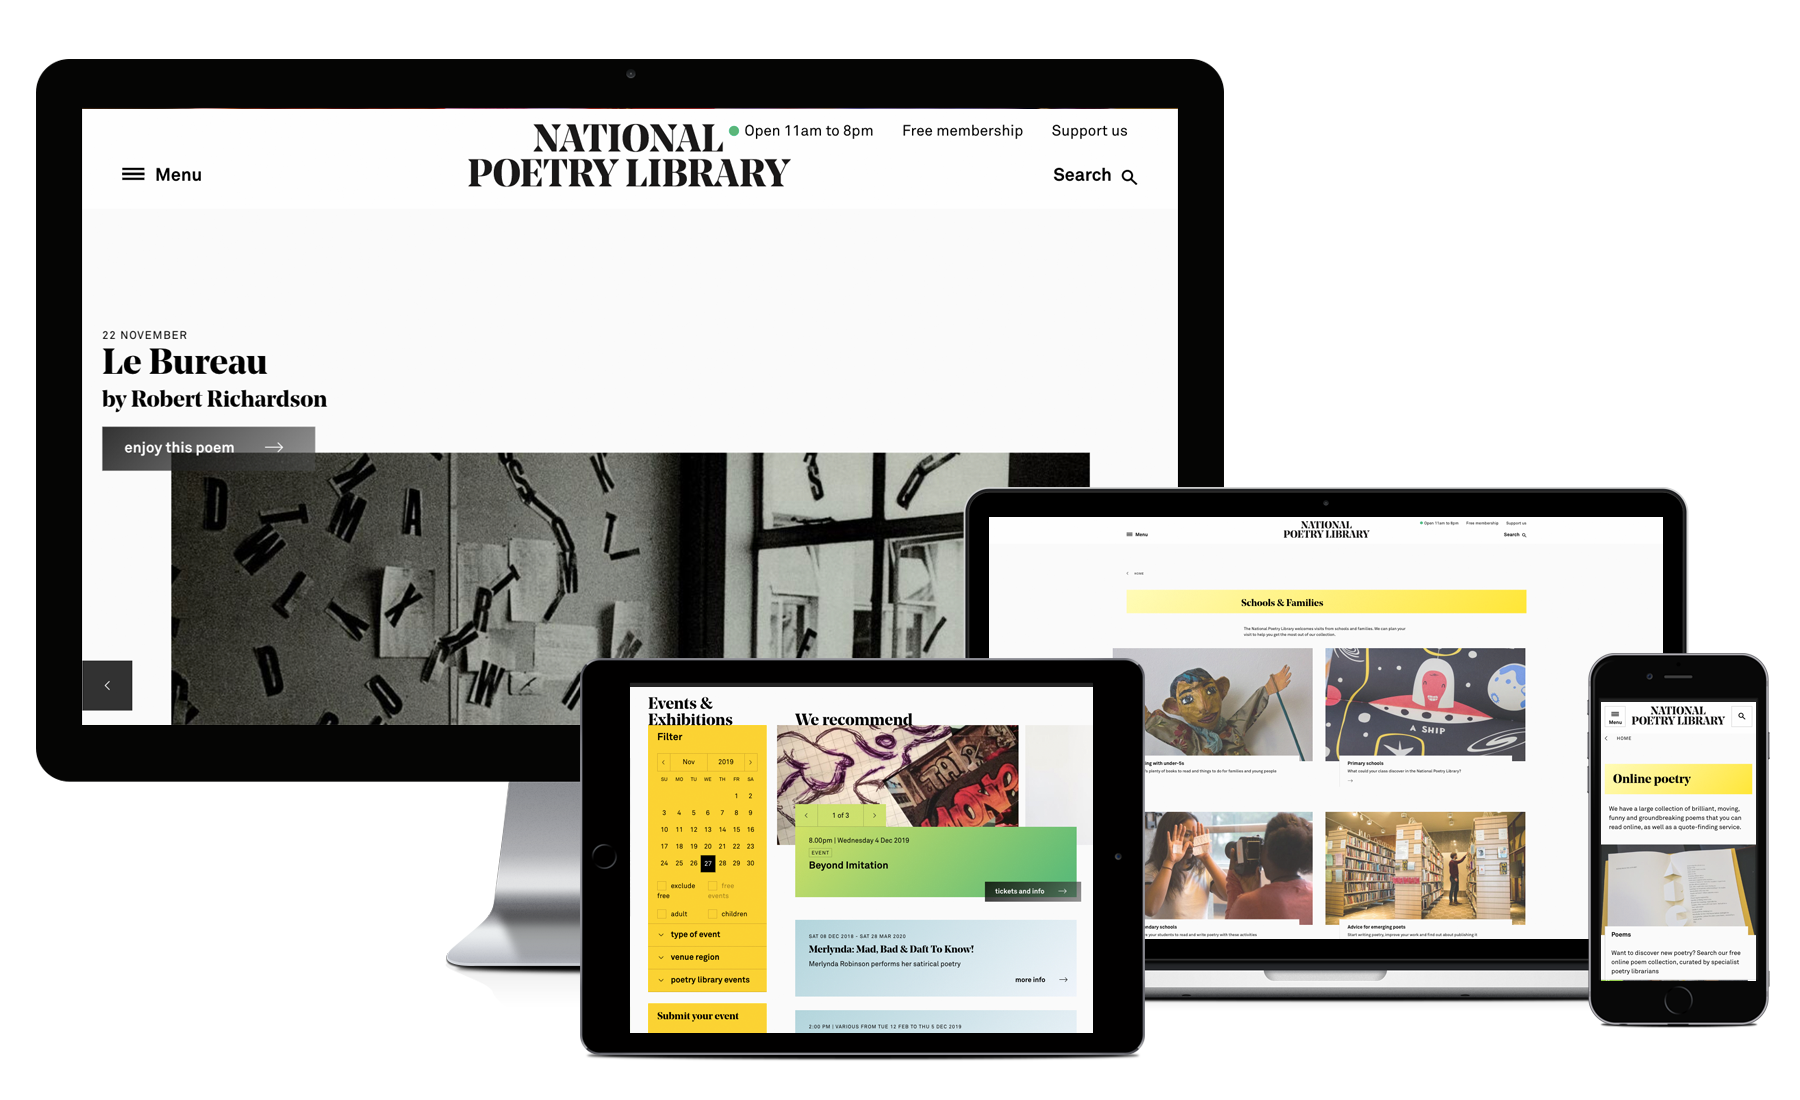 Desktop, Macbook, tablet and iPhone showing pages from the National Poetry Library’s website 